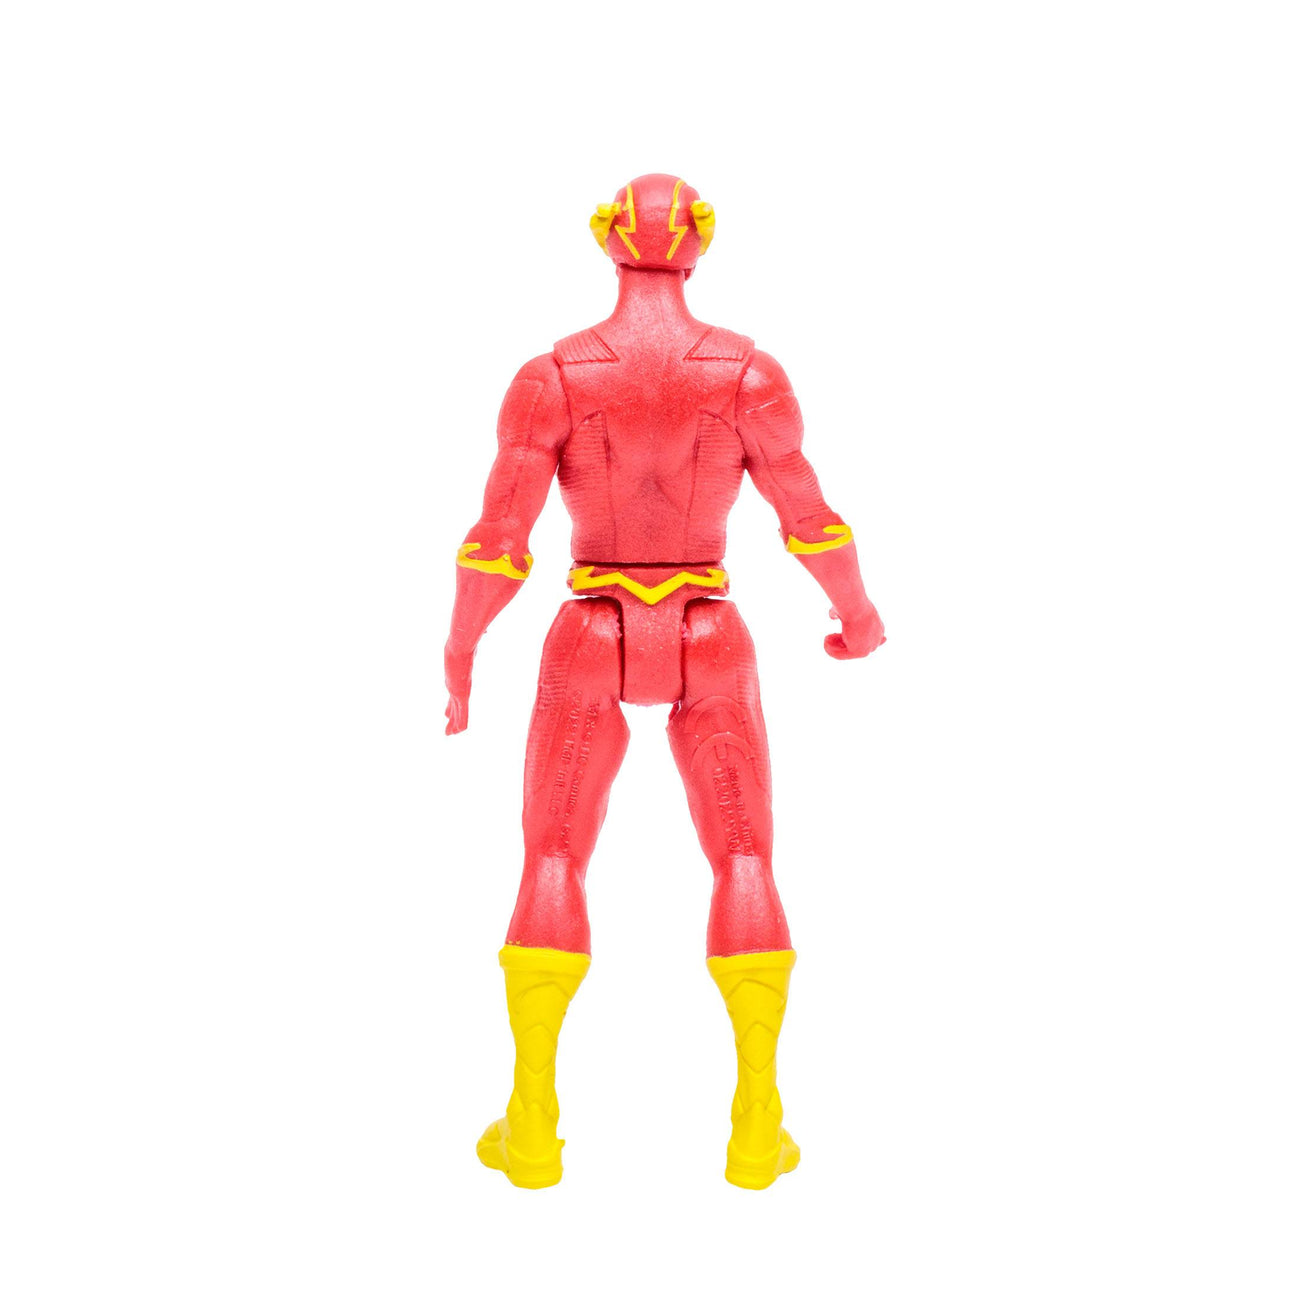 DC Page Punchers: The Flash (Flashpoint) - Actionfigur & Comic-Actionfiguren-McFarlane Toys-Mighty Underground